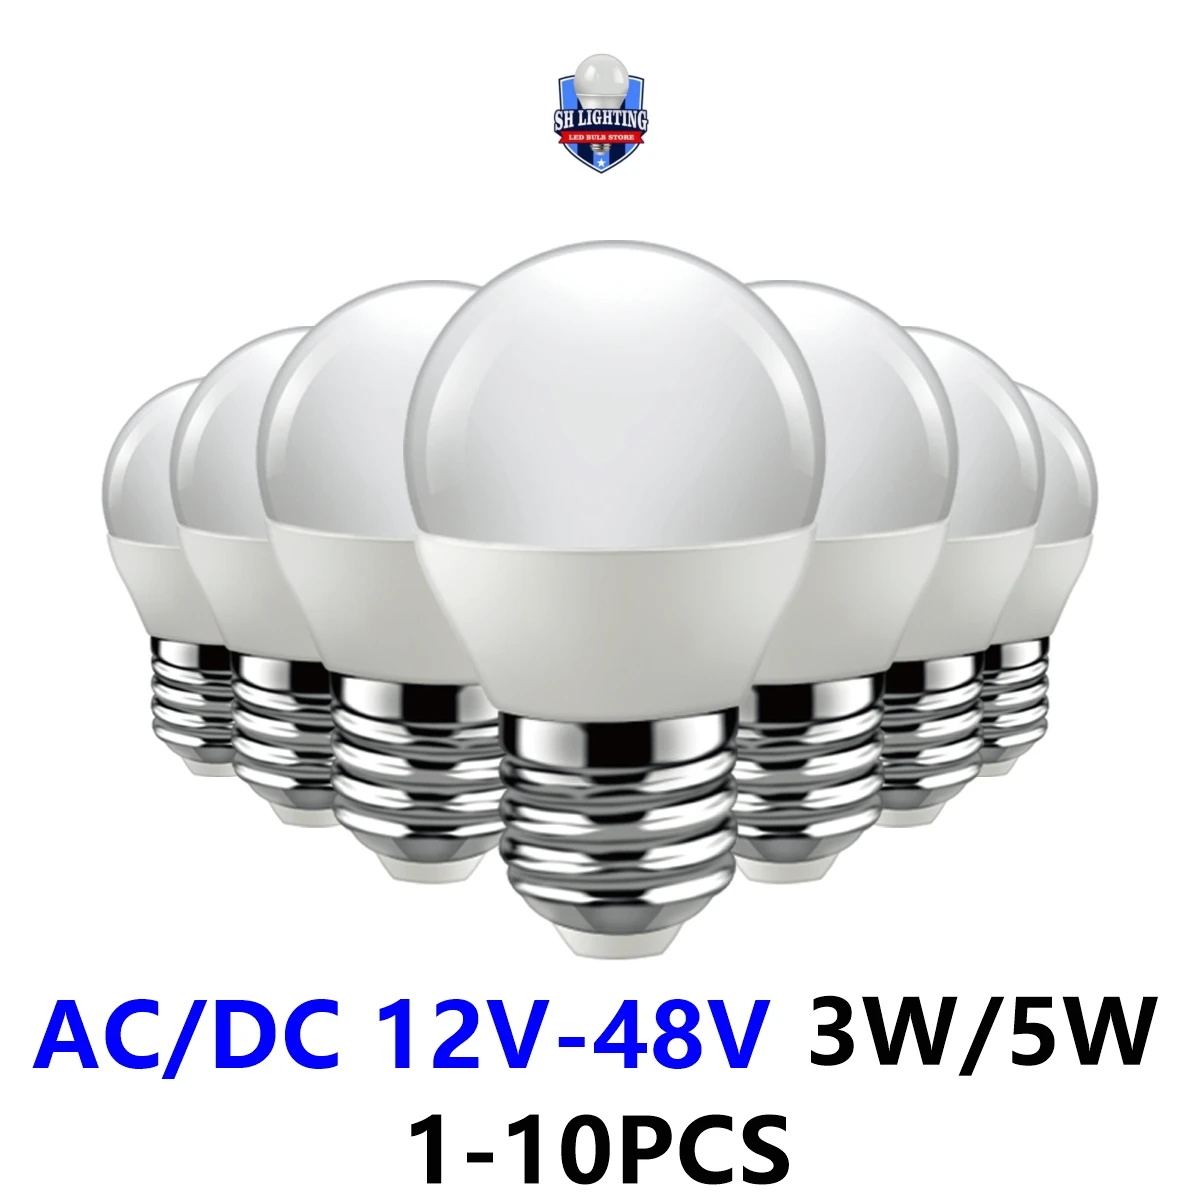 LED Low voltage bulb G45 AC/DC12V-48V E27 B22 3W 5W Super bright warm white light  for solar energy low voltage charger lighting